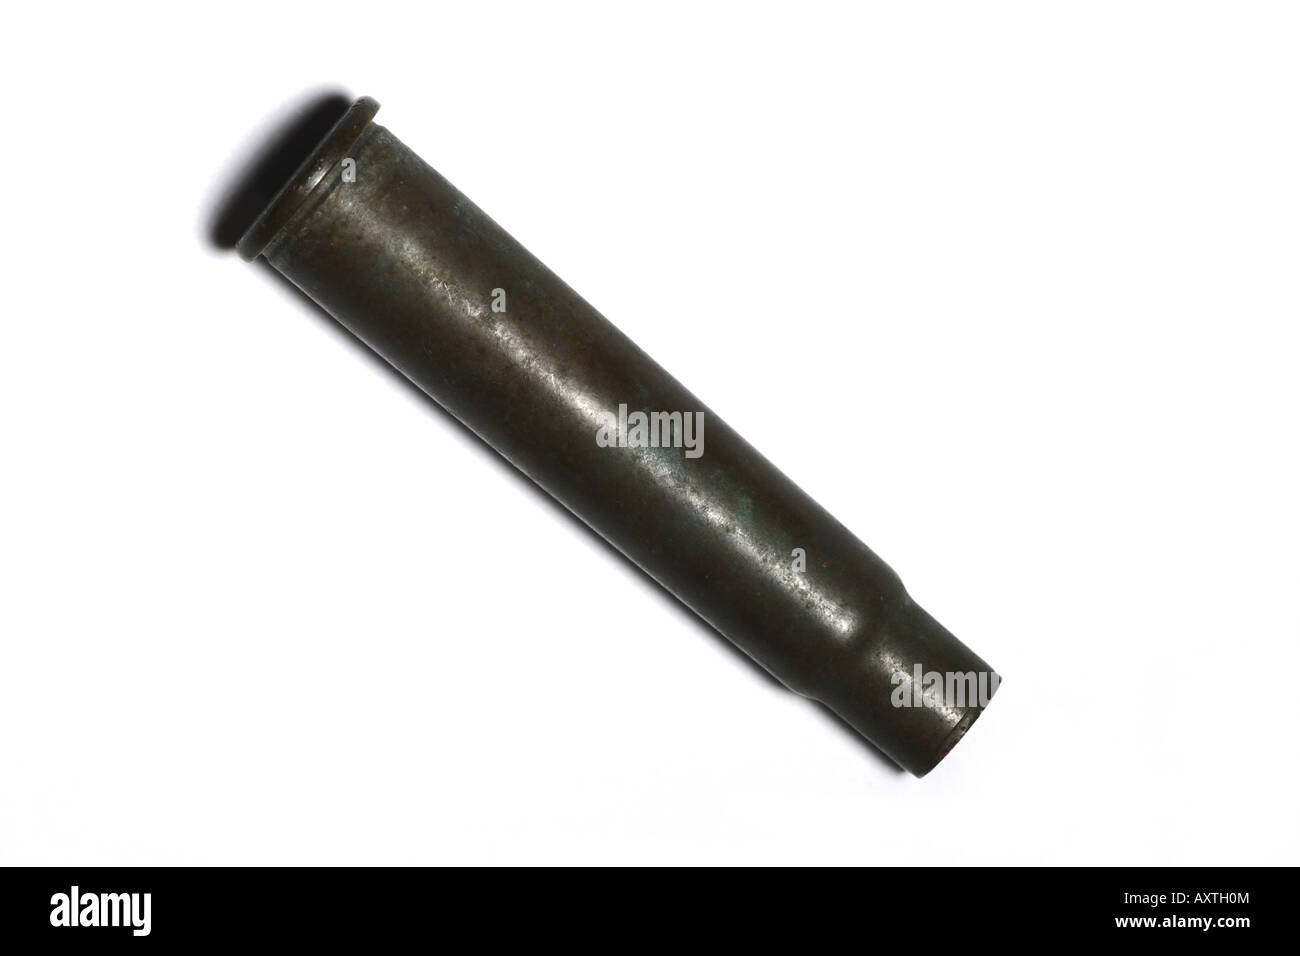 'OLD SHELL CASING' Stock Photo